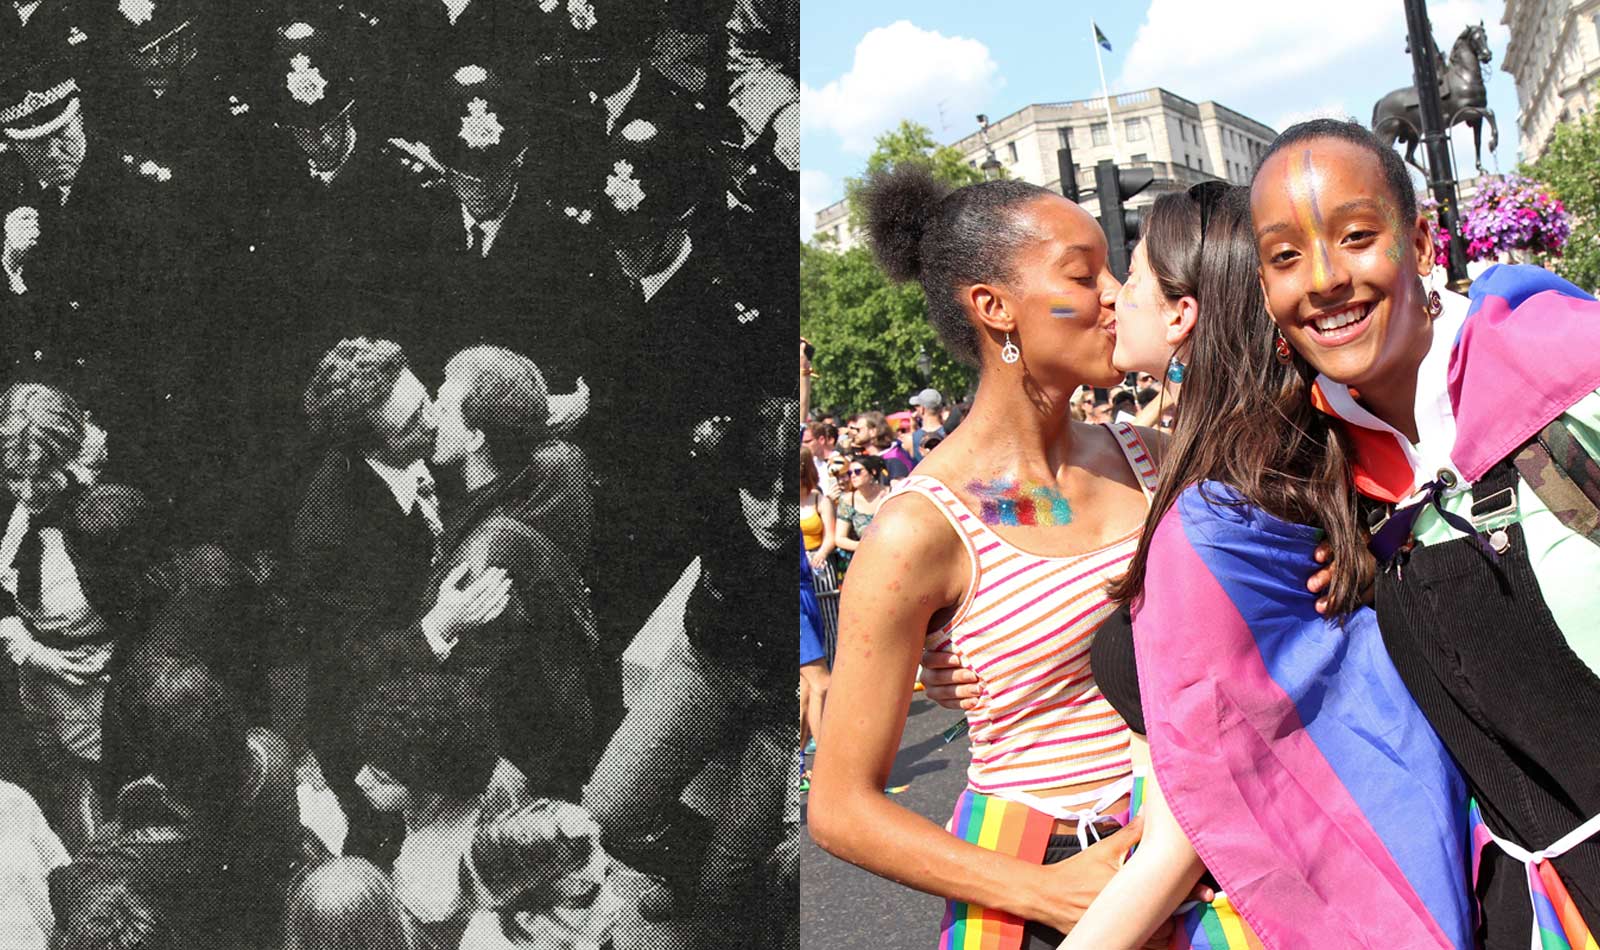 Images of Pride march in London 1980 and 2019 with two men kissing in front of a row of policemen.